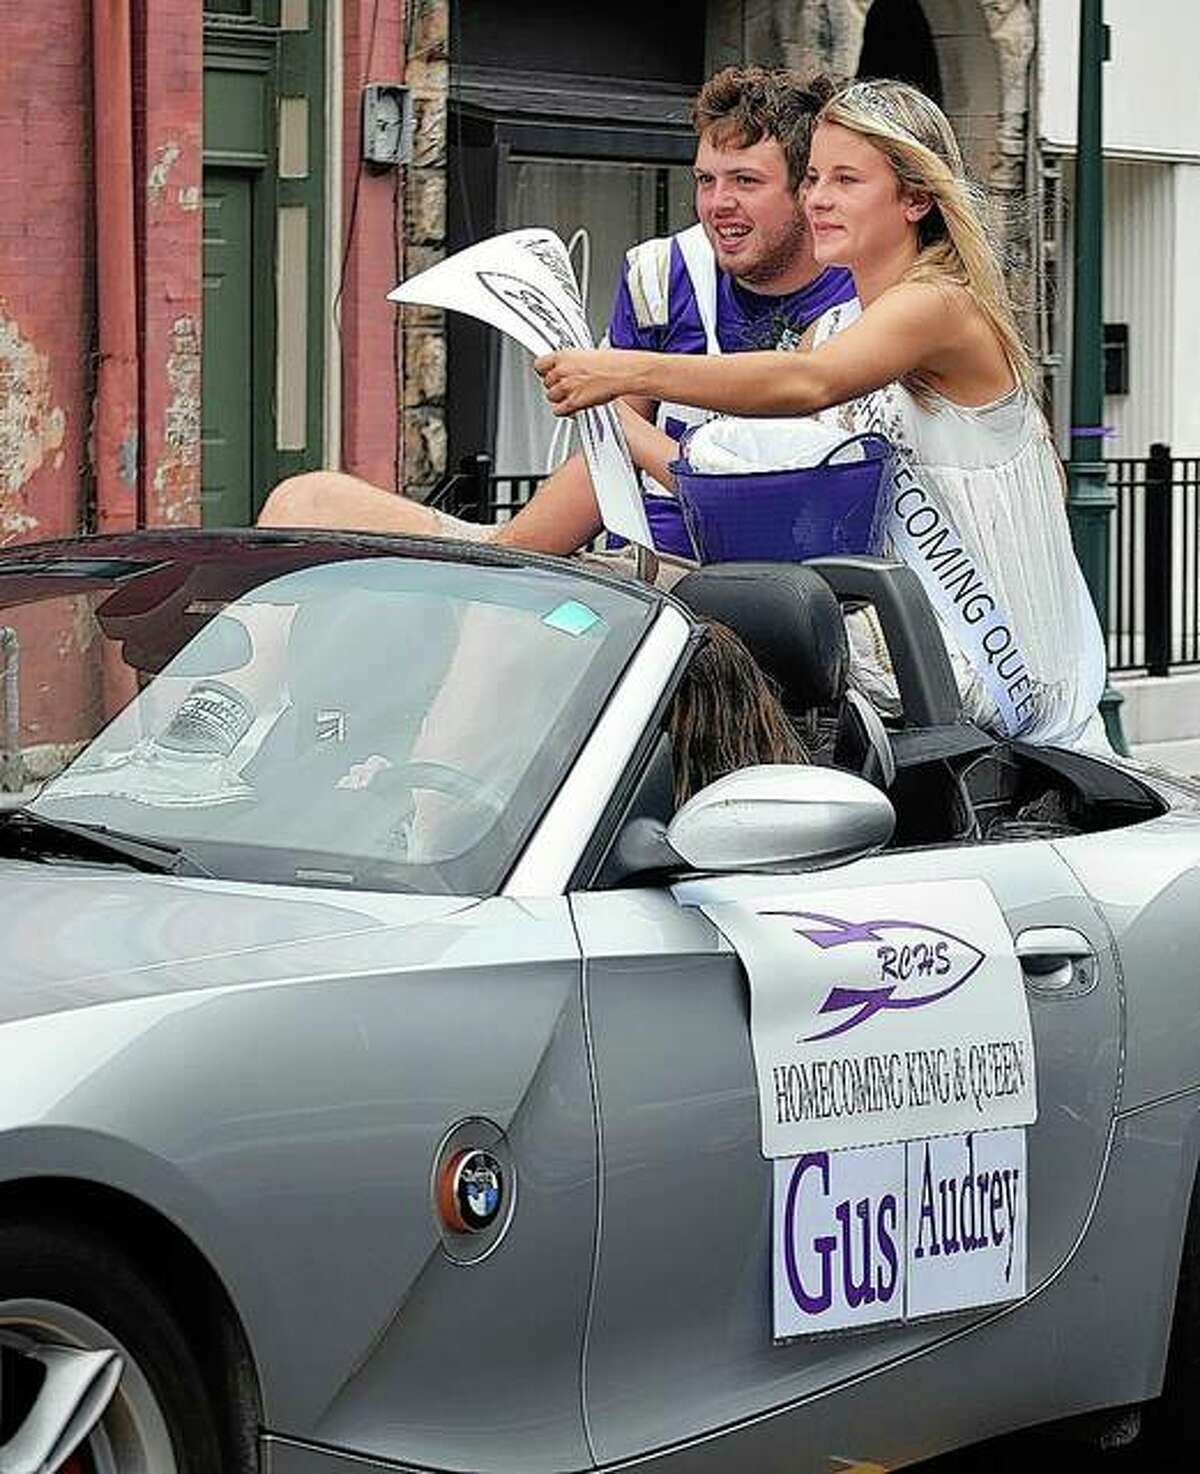 Routt Catholic High School Homecoming King Gus Abell and Queen Audrey Huffman ride Friday in Routt’s homecoming parade.